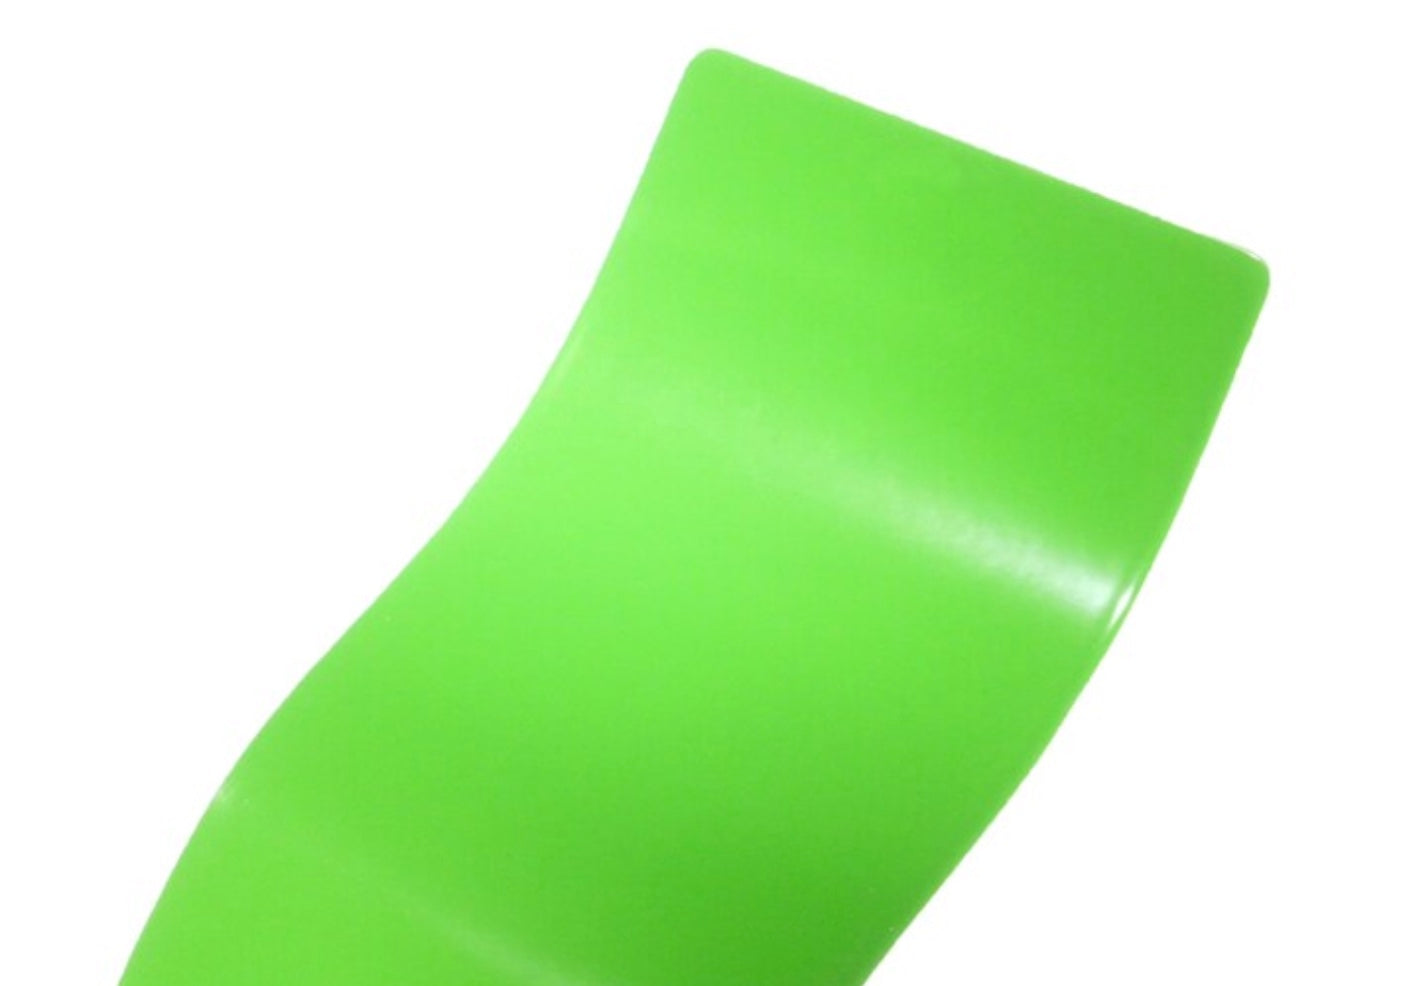 Powder Coating - Sweet Pea Green, 2oz container, High Gloss